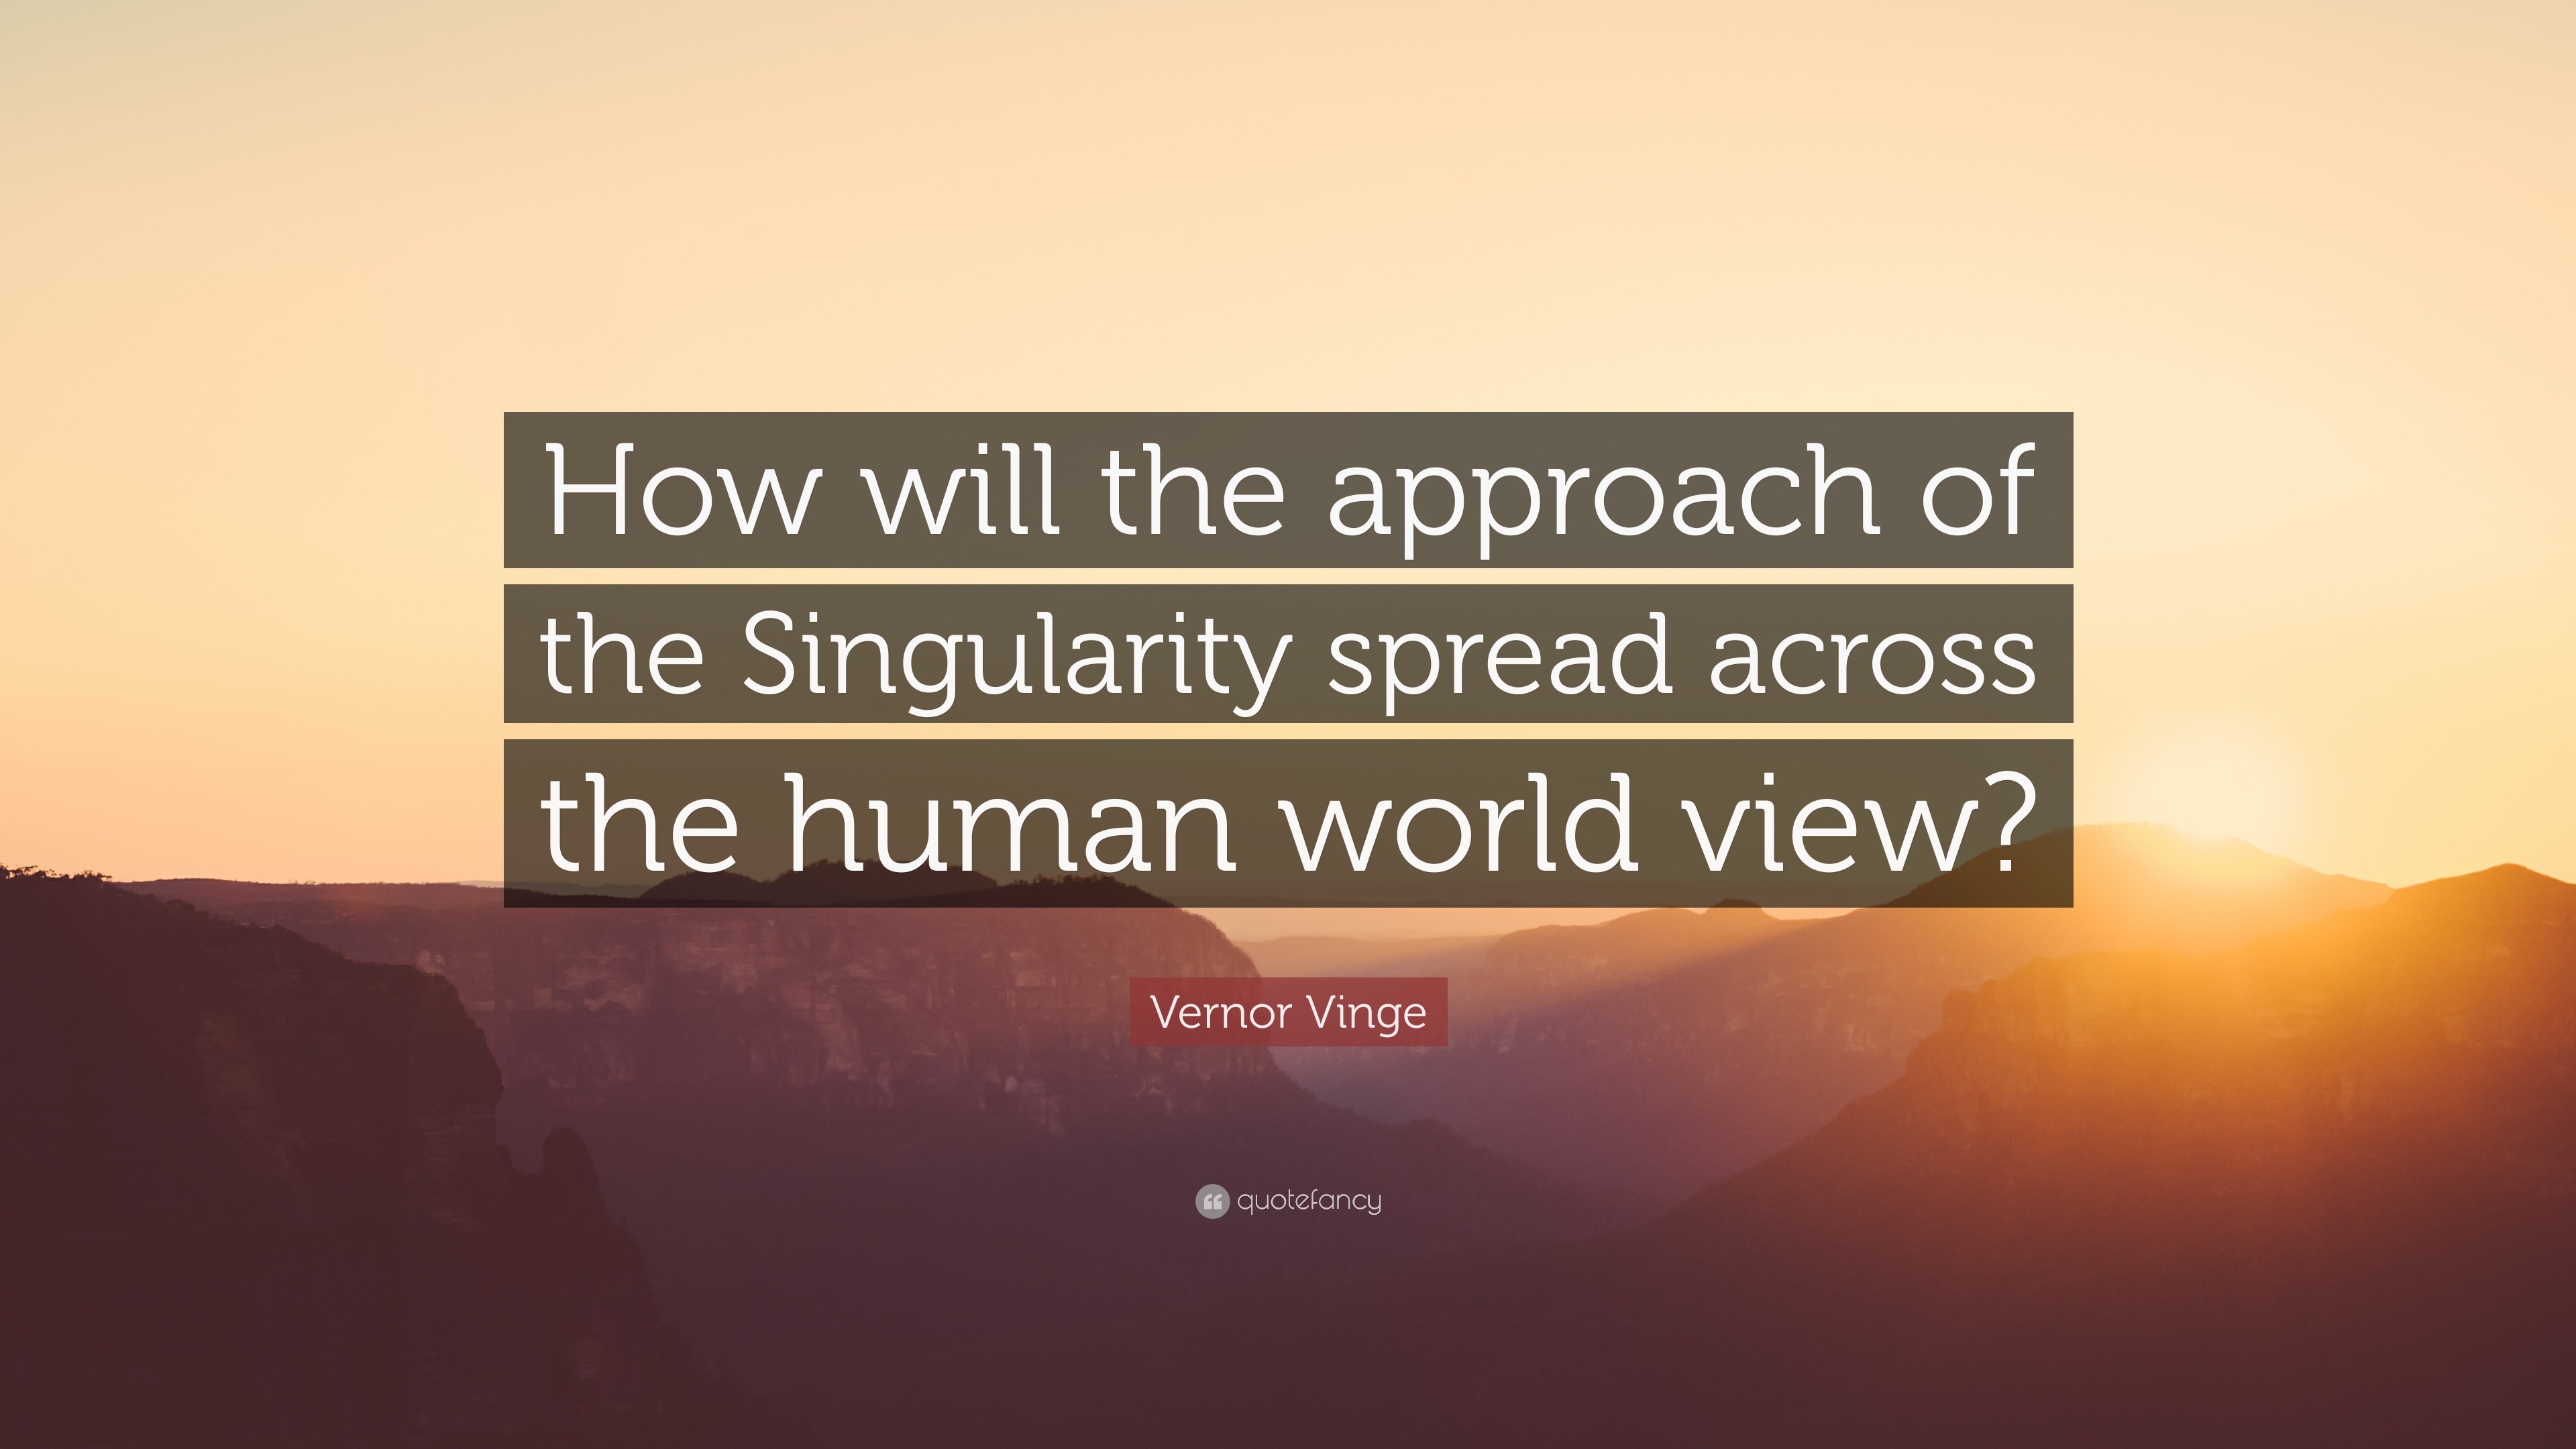 https://quotefancy.com/media/wallpaper/3840x2160/1124327-Vernor-Vinge-Quote-How-will-the-approach-of-the-Singularity-spread.jpg